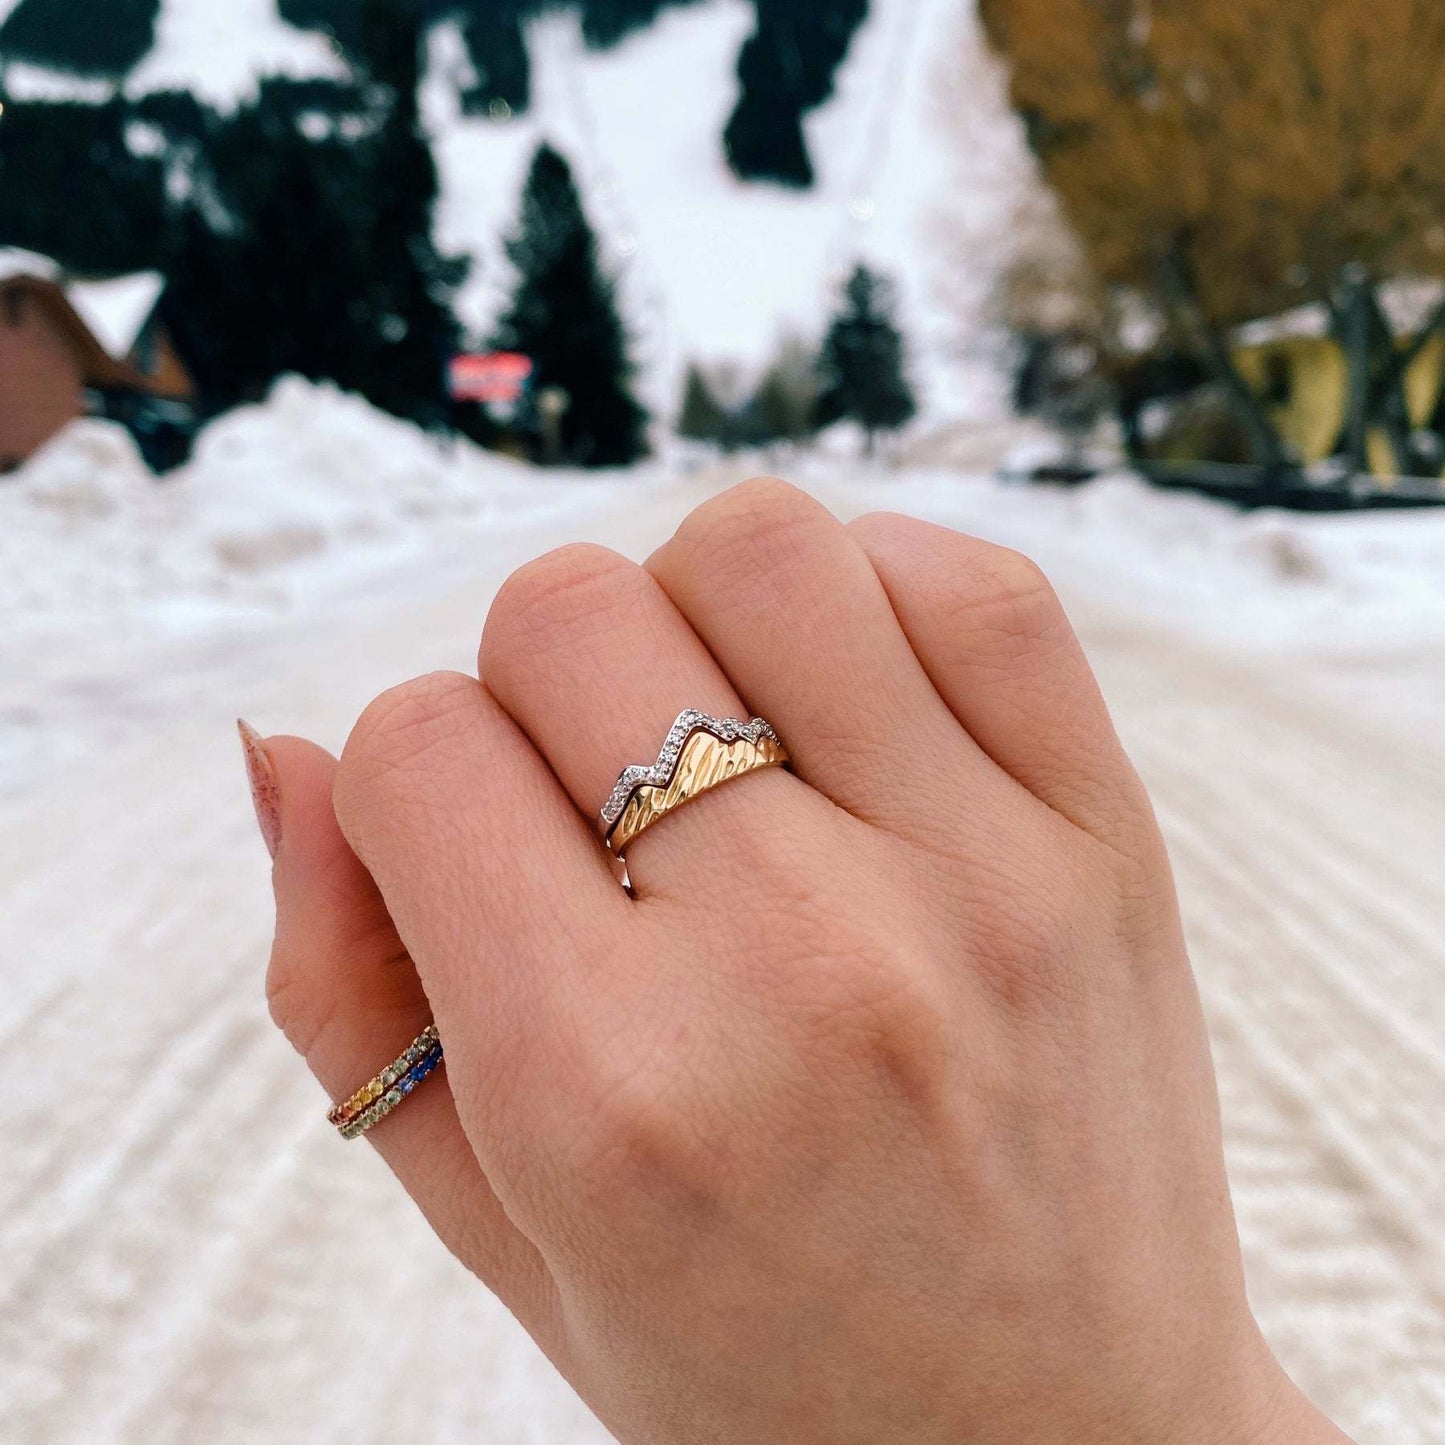 🔥Last Day 50% OFF 💪Get Stronger Mountain Ring ( Set Of 2 )🎁